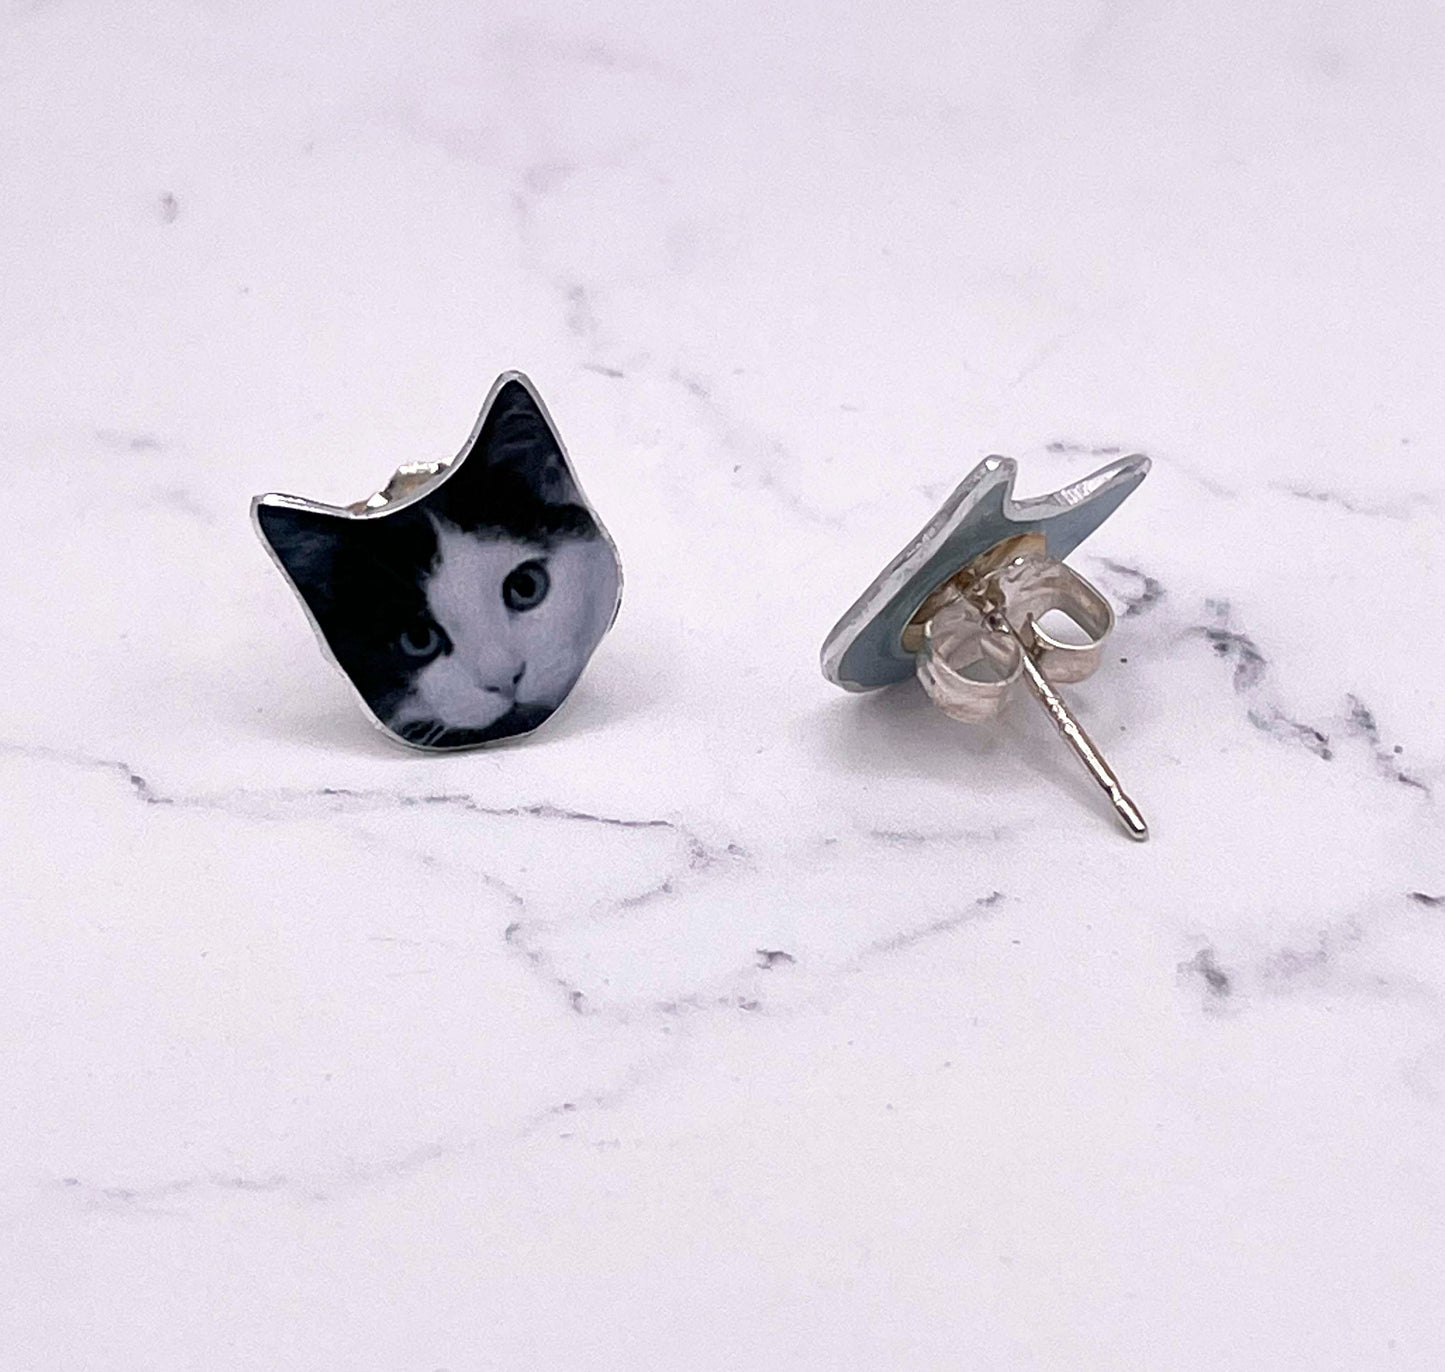 Black and White Cats - Black and White Cat Earrings - Kitten Earrings - Cat Gift - Cute Cat Earrings - Cat Stud Earrings